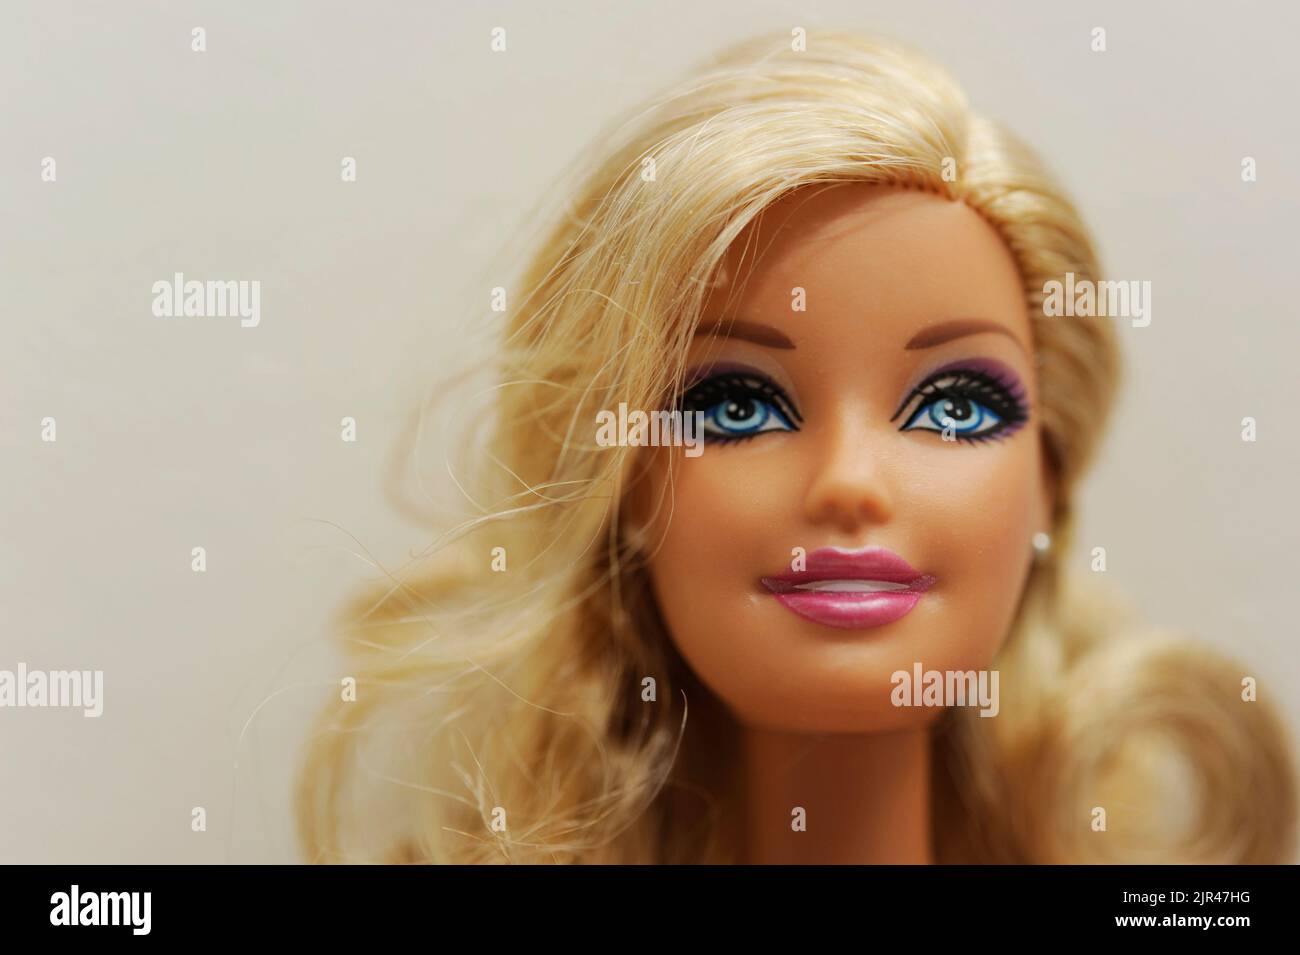 Blonde Barbie doll face close up with copy space Stock Photo